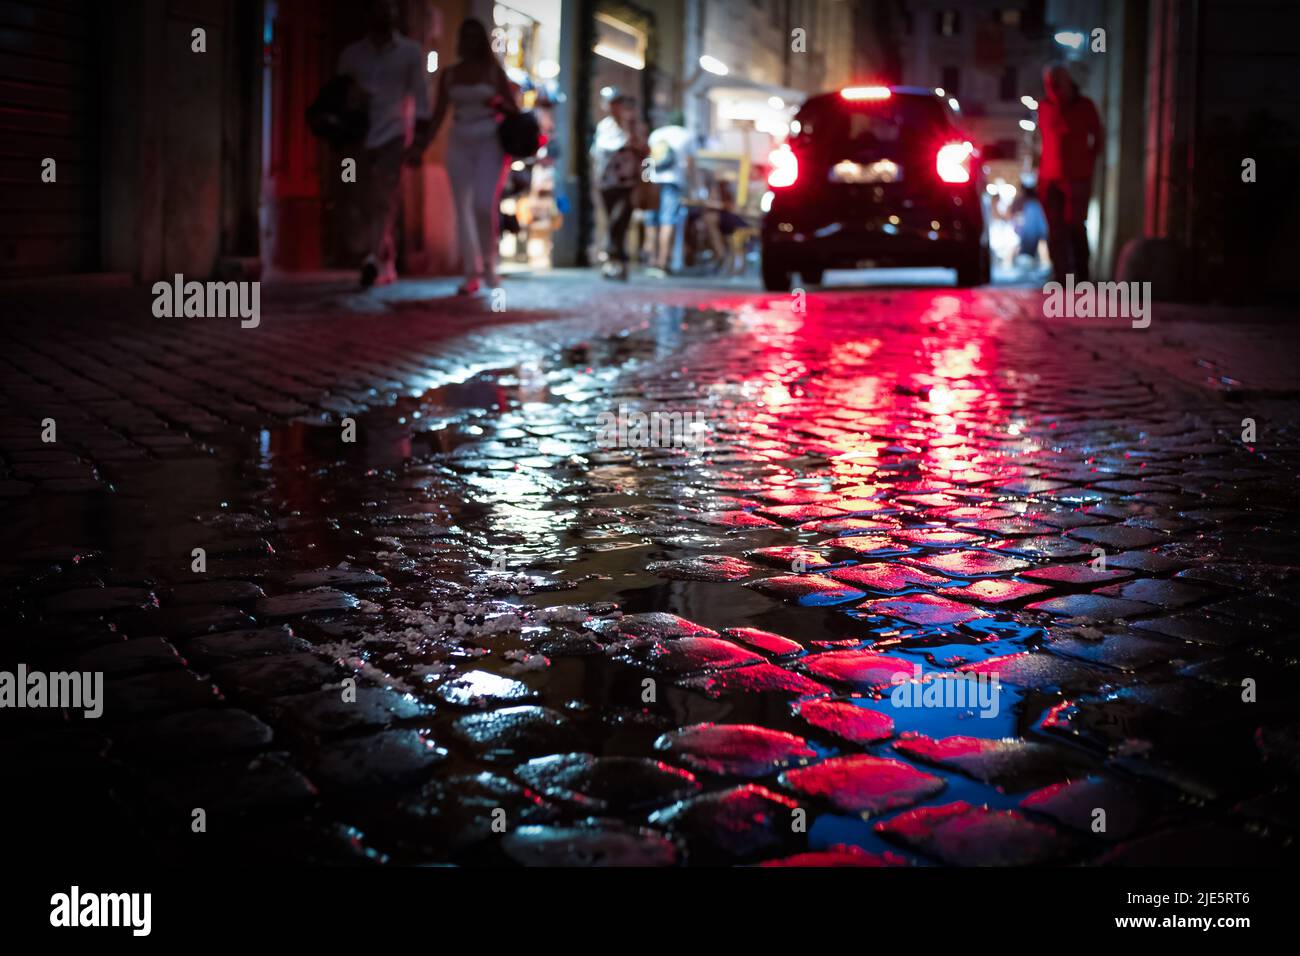 Late night on a rainy evening in Rome, Italy. Stock Photo